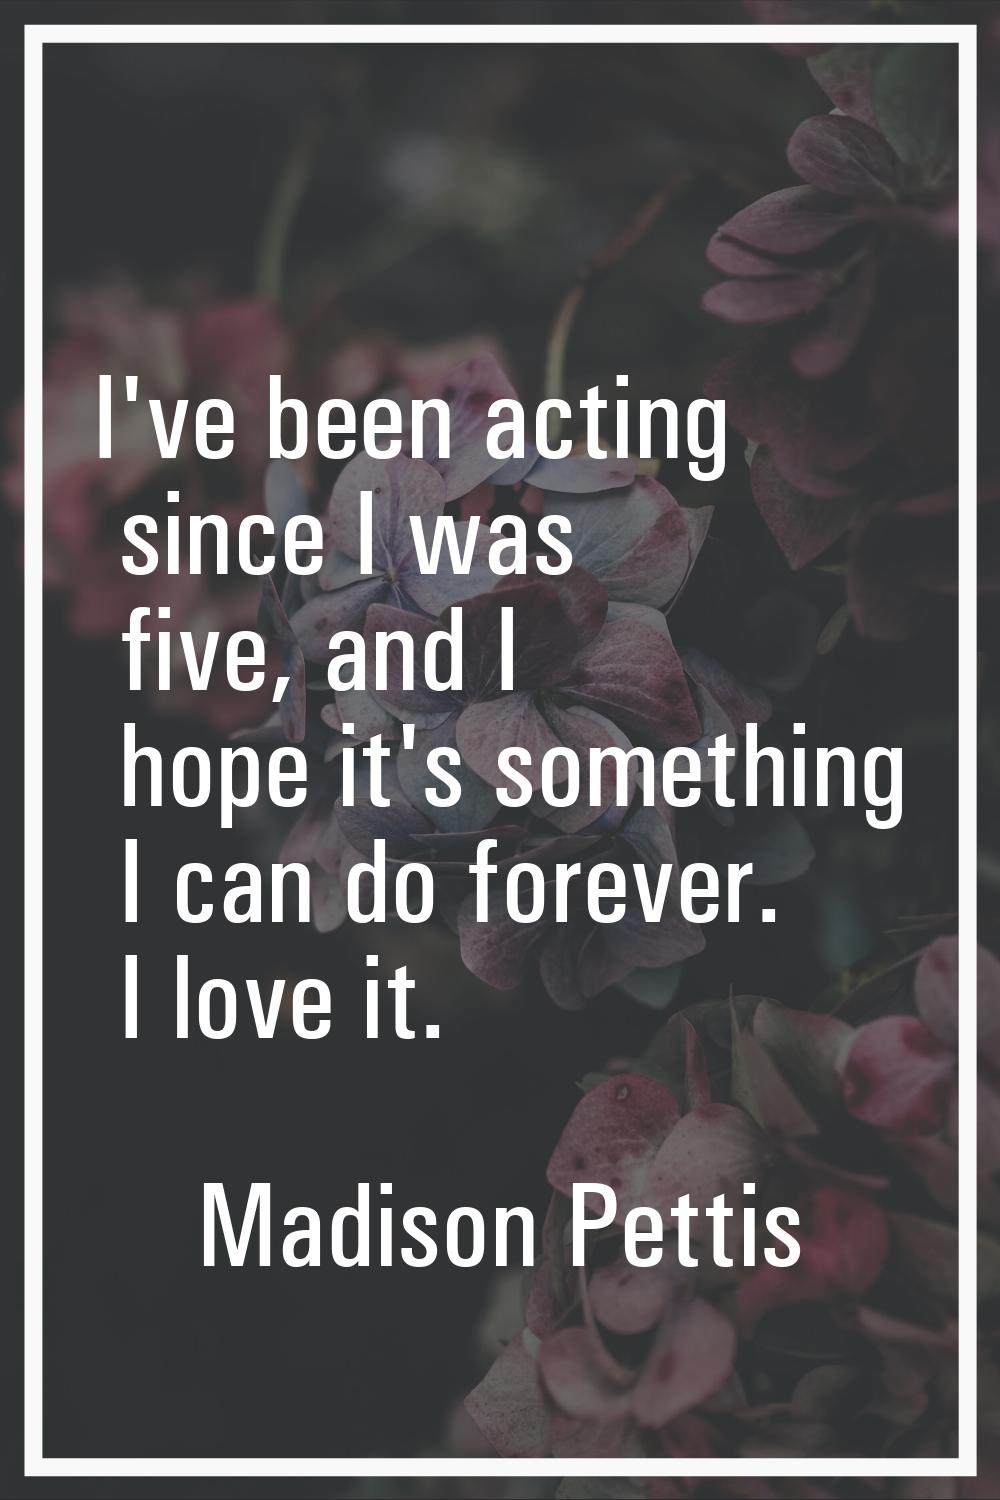 I've been acting since I was five, and I hope it's something I can do forever. I love it.